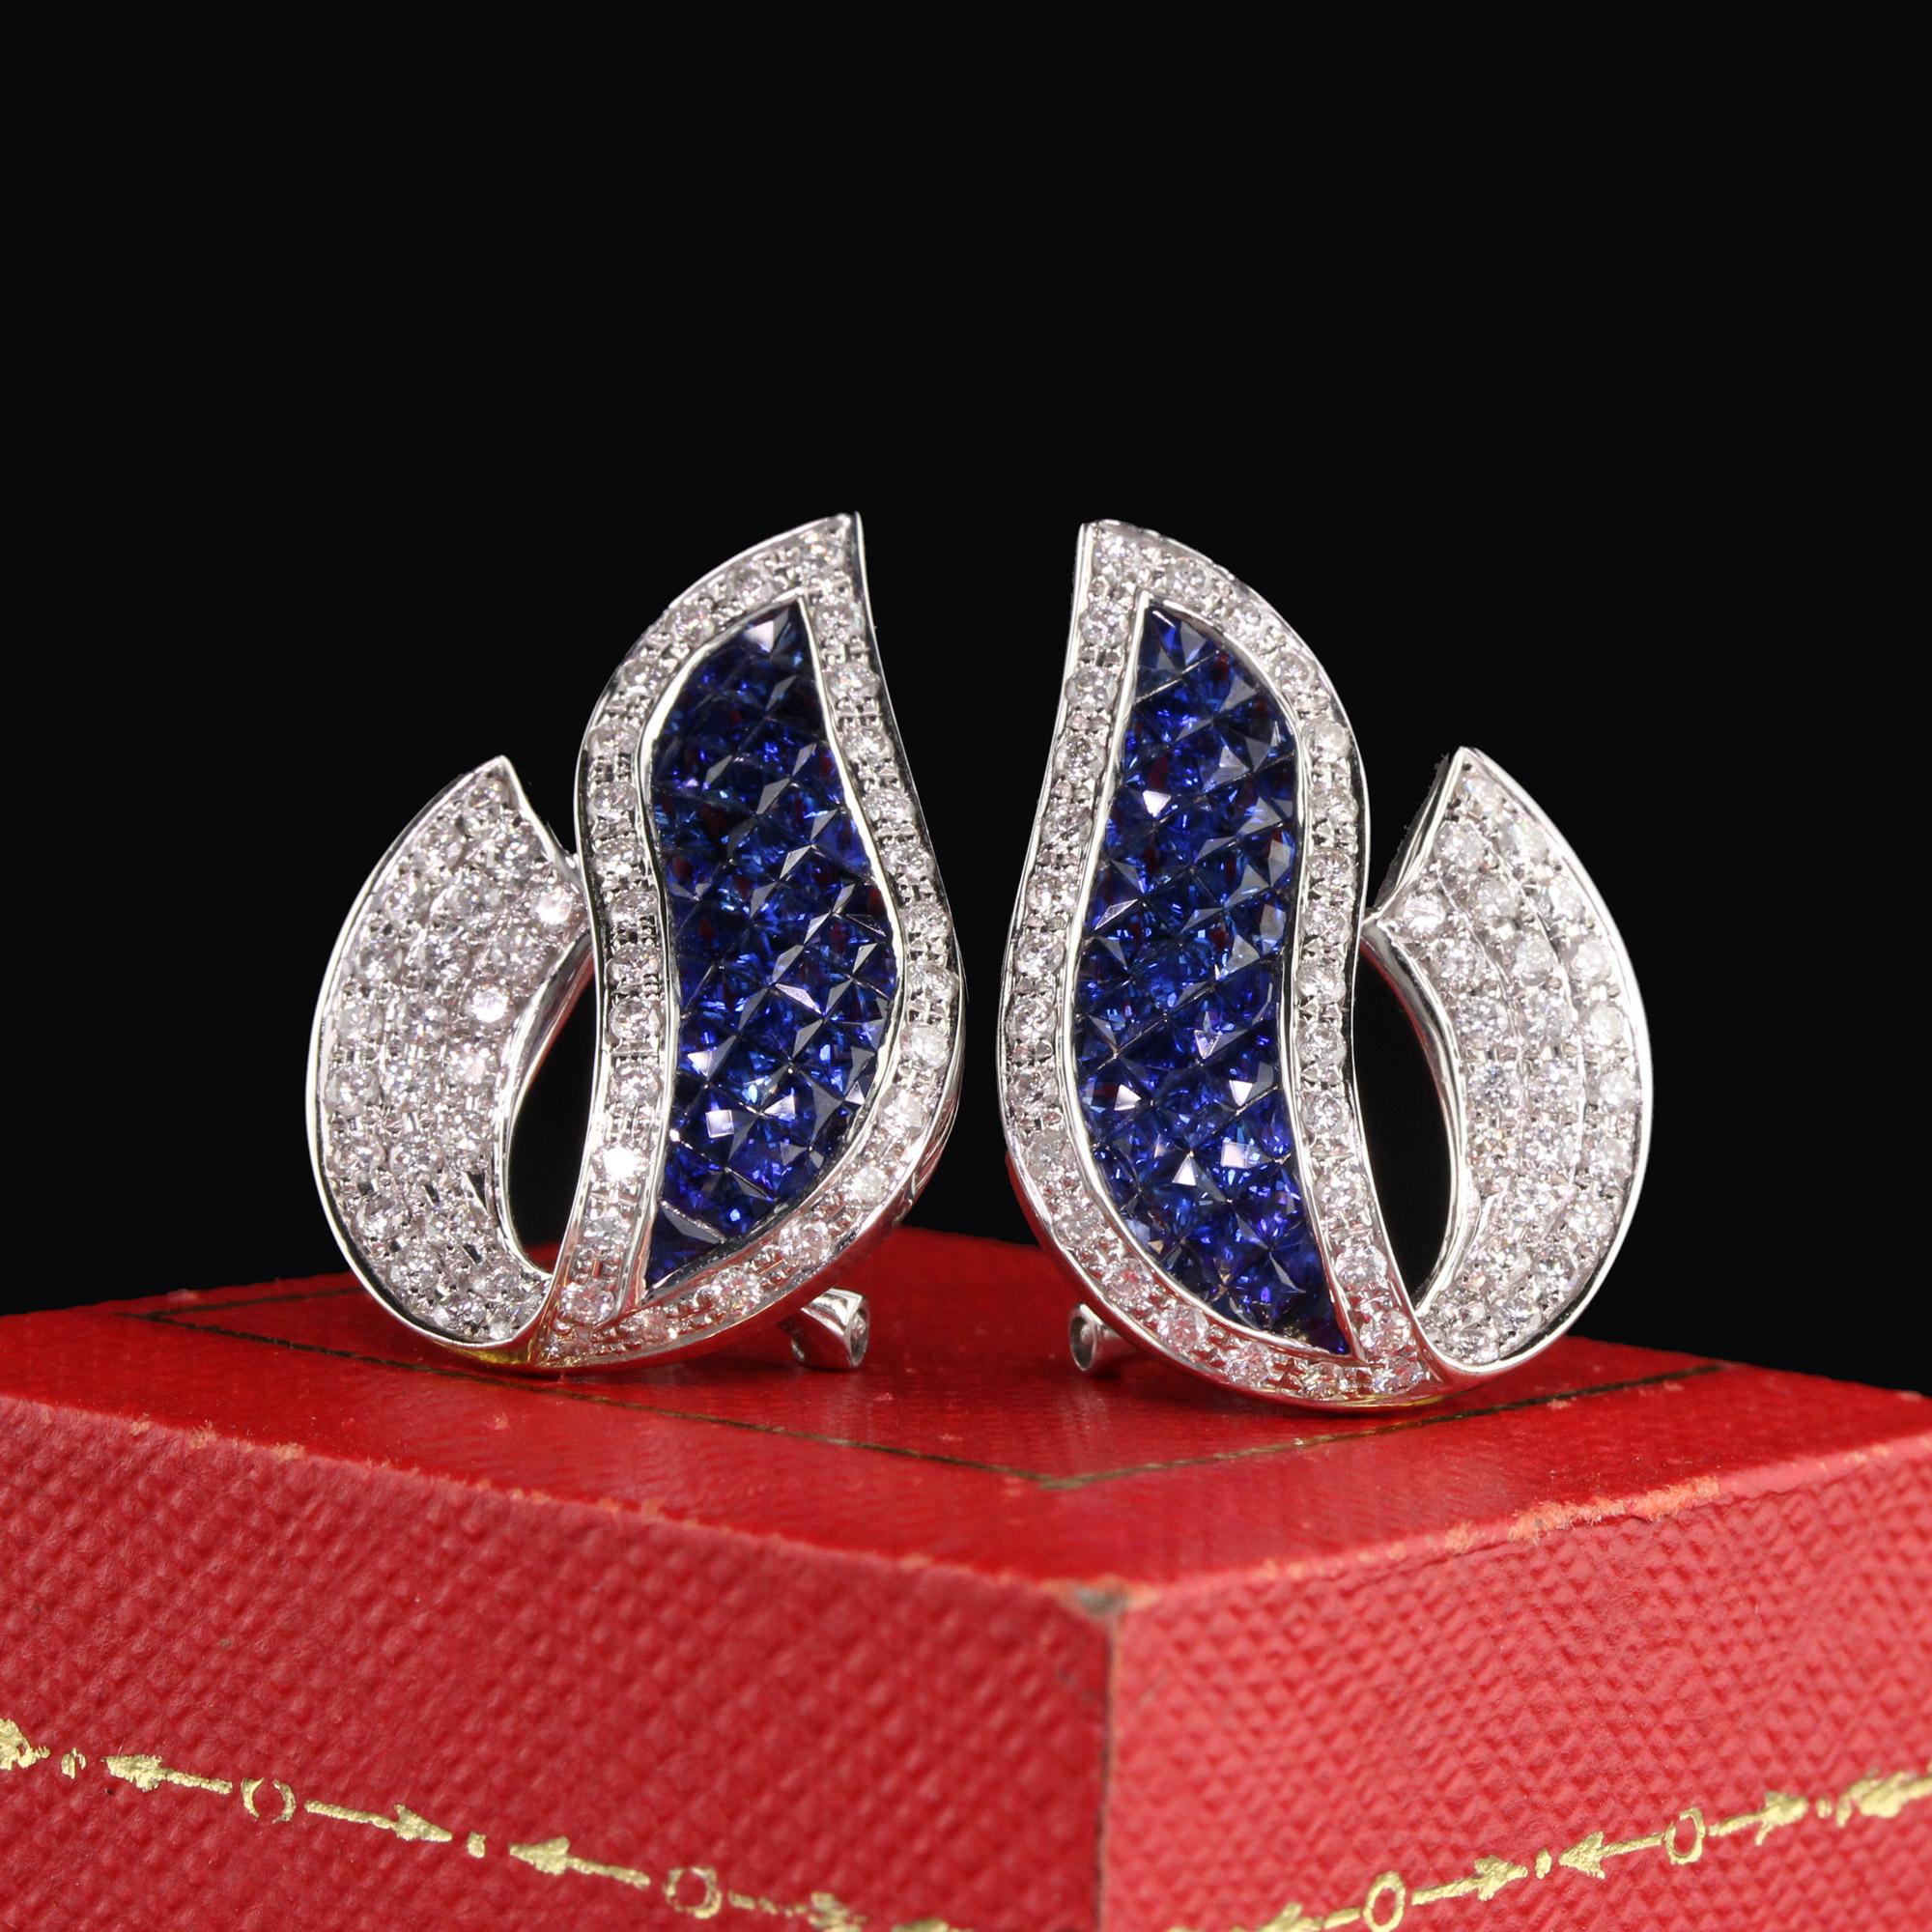 Dazzling sapphire and diamond earrings with elaborate design.

Metal: 18K White Gold

Weight: 9.2 Grams

Diamond Weight: Approx. 2 ct.

Diamond Color: G

Diamond Clarity: VS2

Gemstone Weight: Approx. 5 ct. sapphire

Measurements: 26.20 x 18.52 mm